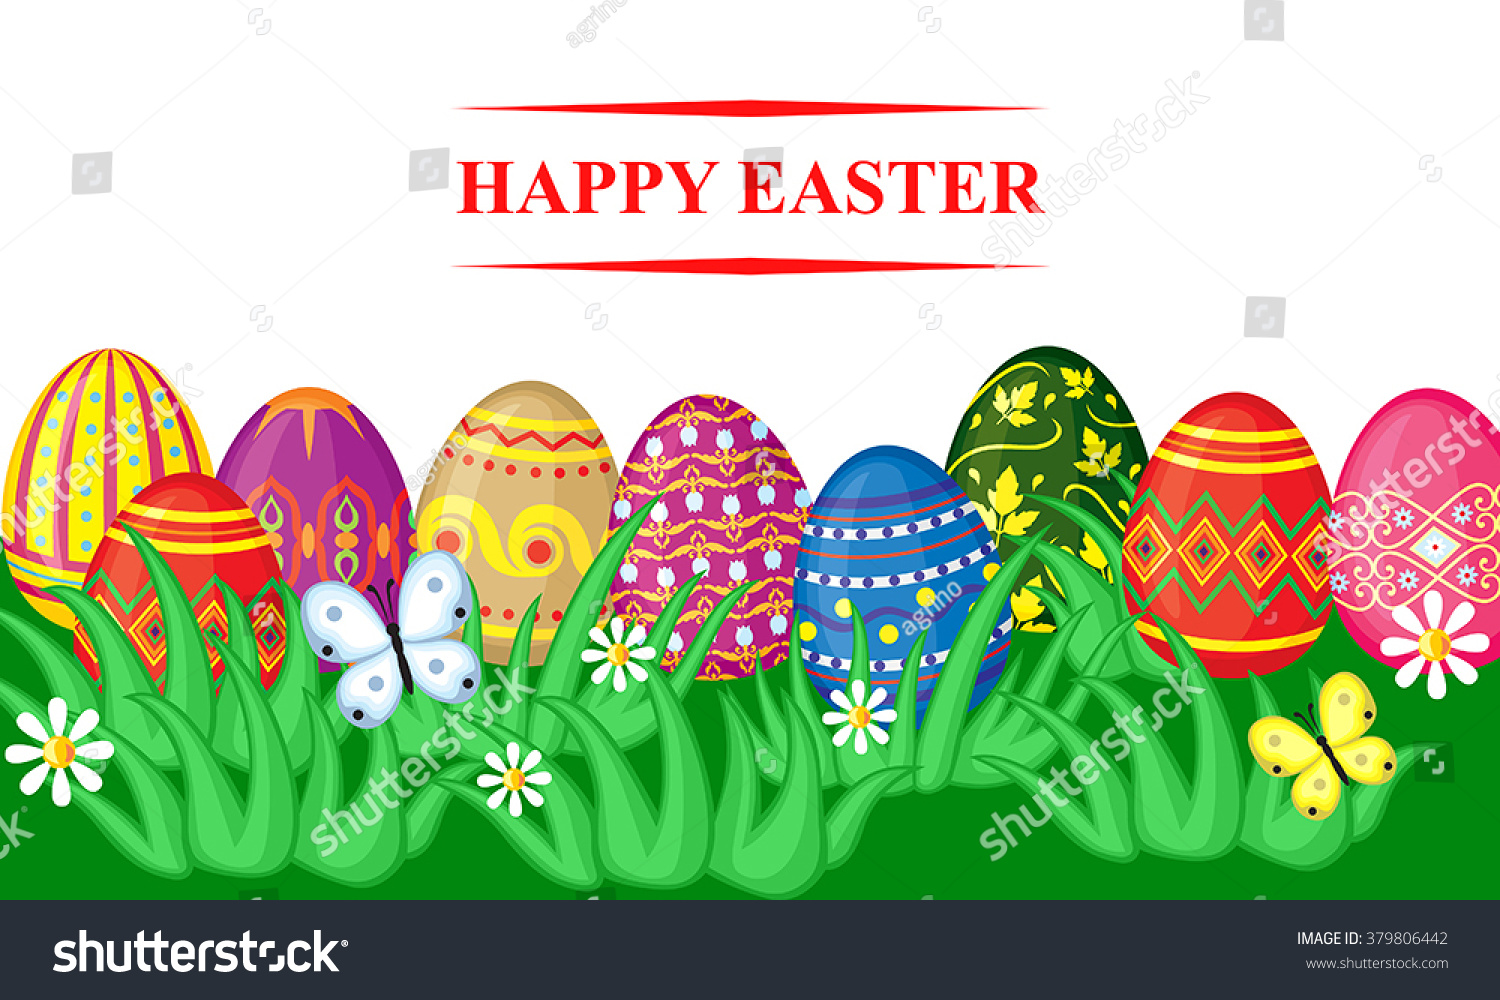 Vector illustrations of spring Easter card with cartoon decorative eggs in grass on meadow #379806442